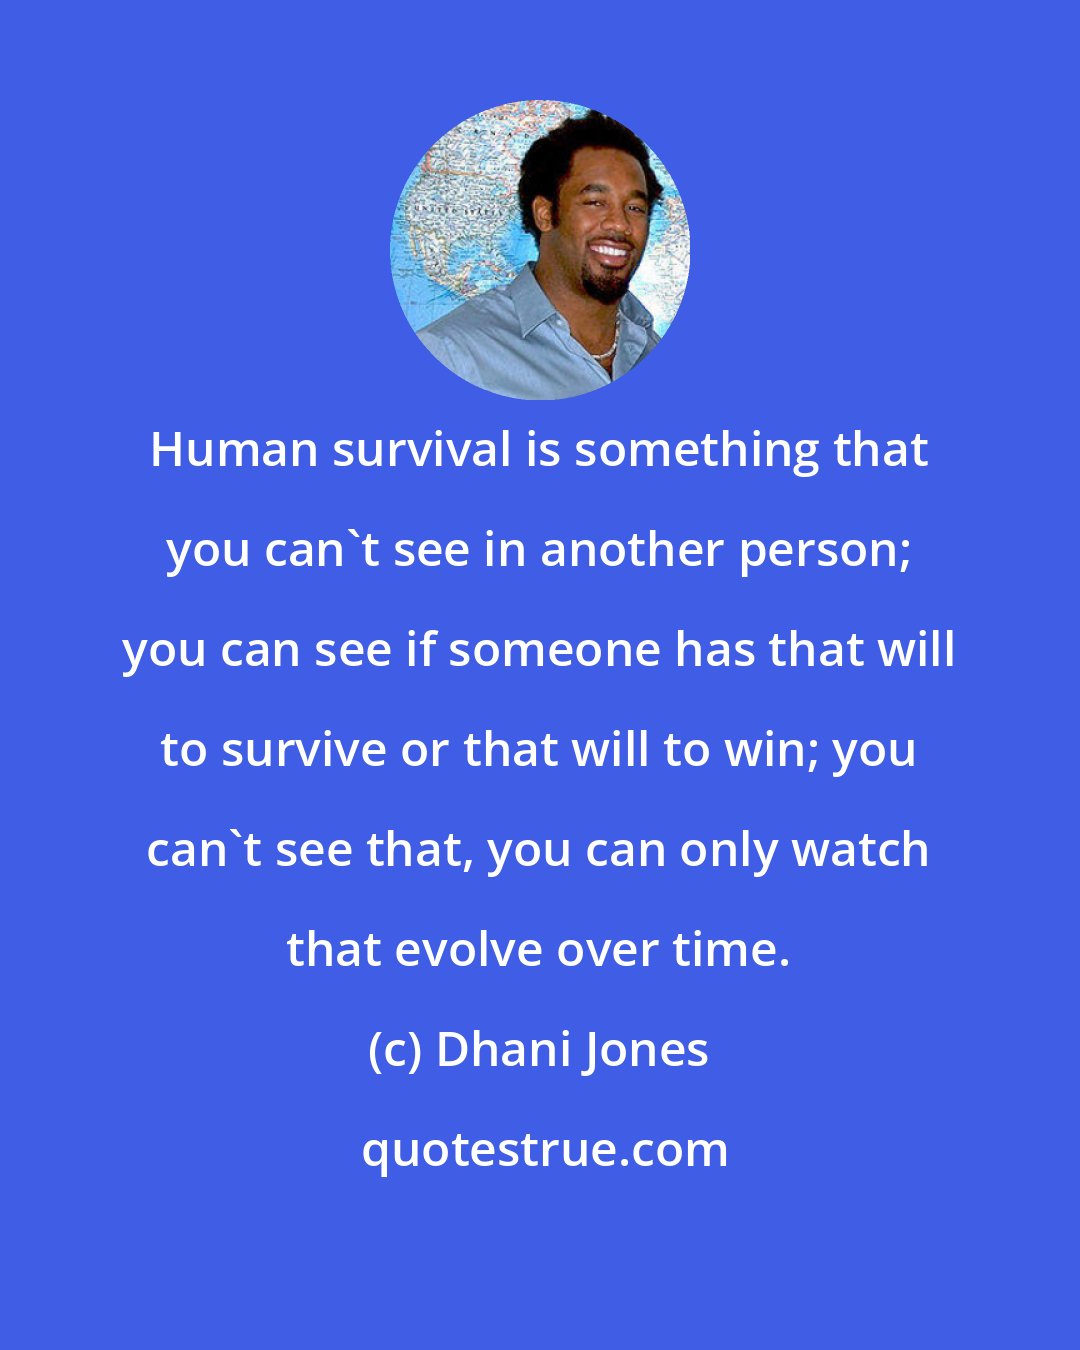 Dhani Jones: Human survival is something that you can't see in another person; you can see if someone has that will to survive or that will to win; you can't see that, you can only watch that evolve over time.